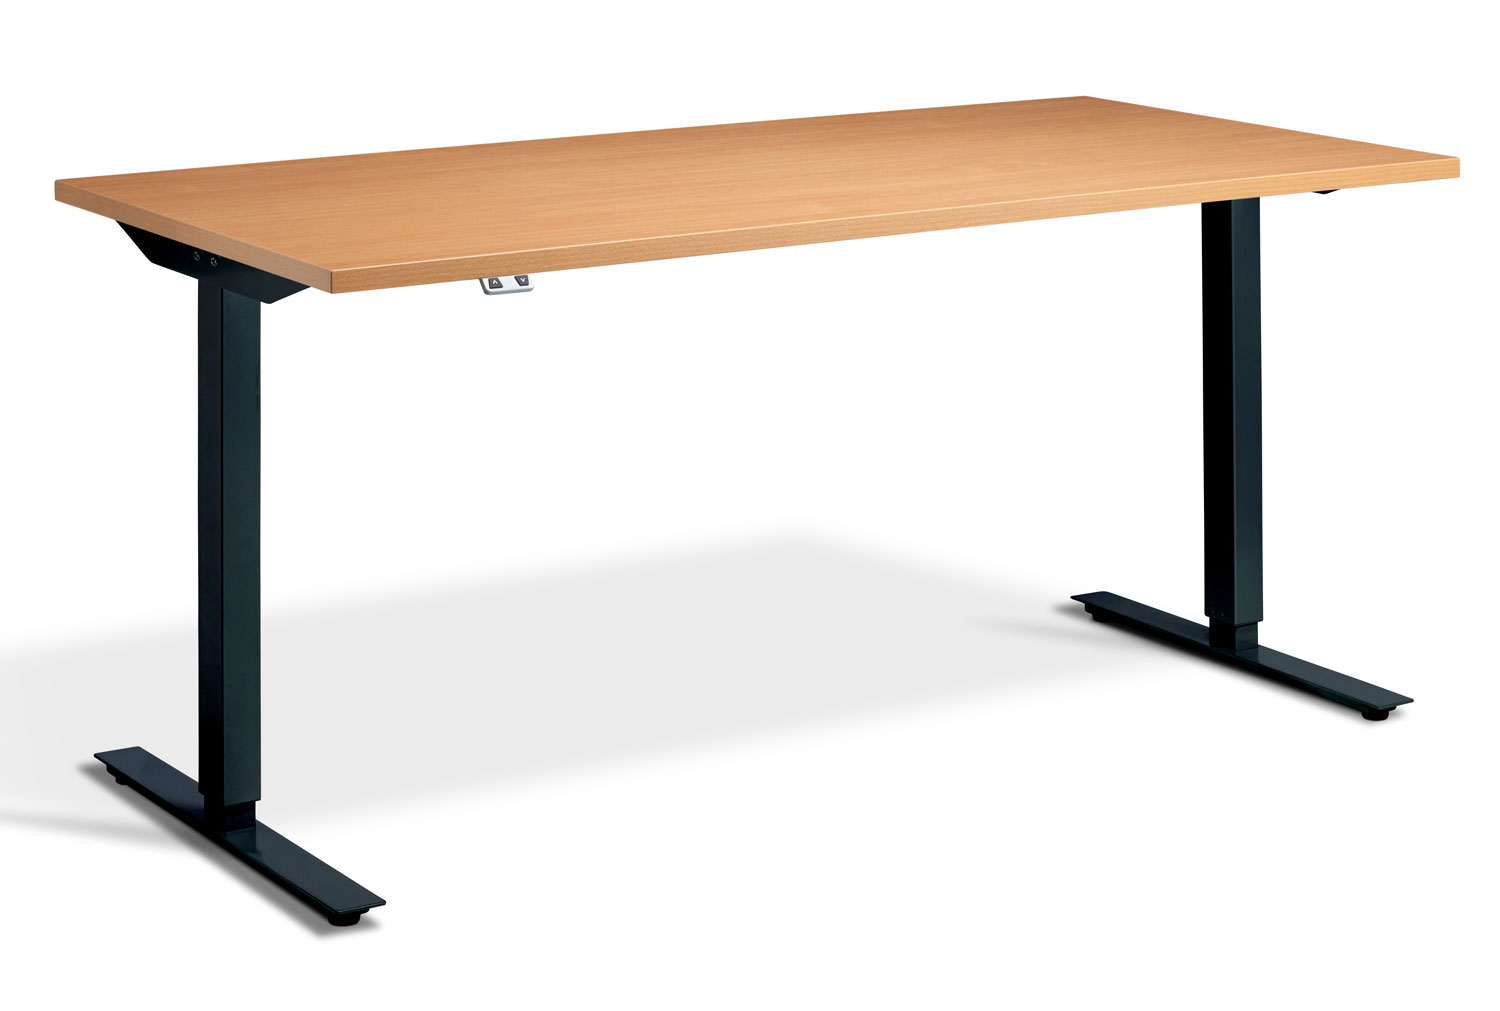 Calgary Dual Motor Height Adjustable Office Desk, 140wx80dx70-120h (cm), Black Frame, Beech, Express Delivery